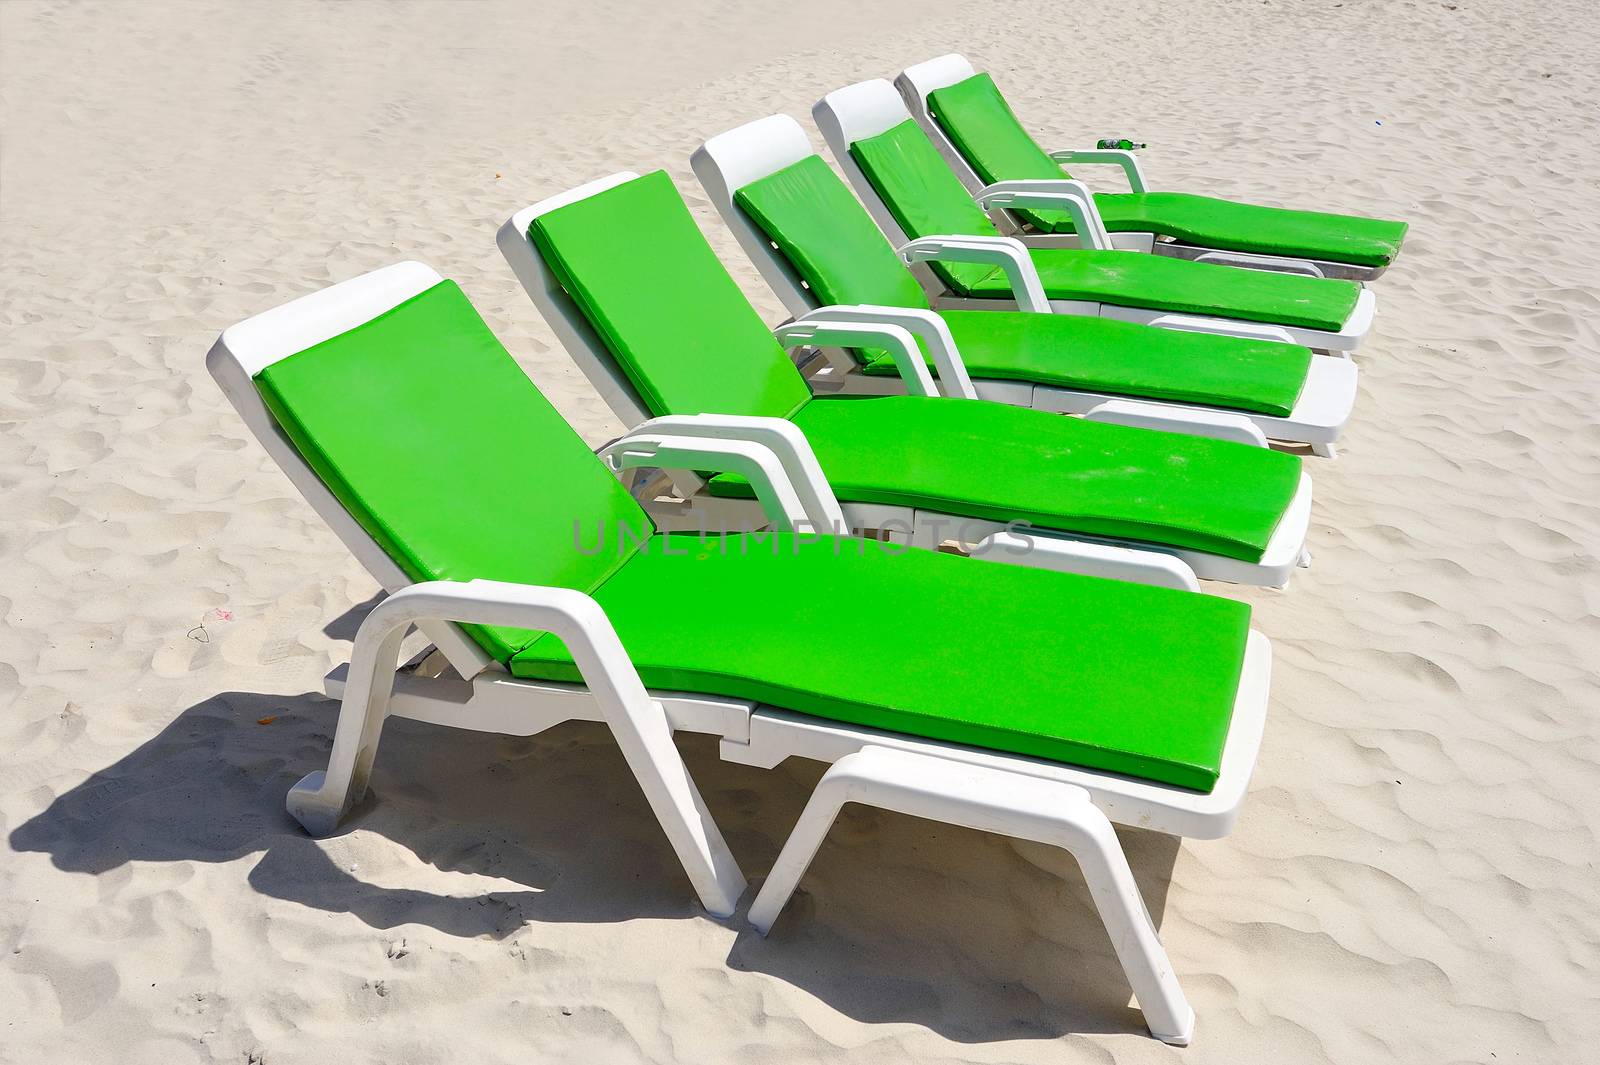 colorful of Deck Chairs on the Beach in Sunny Day ,Pattaya Thail by think4photop